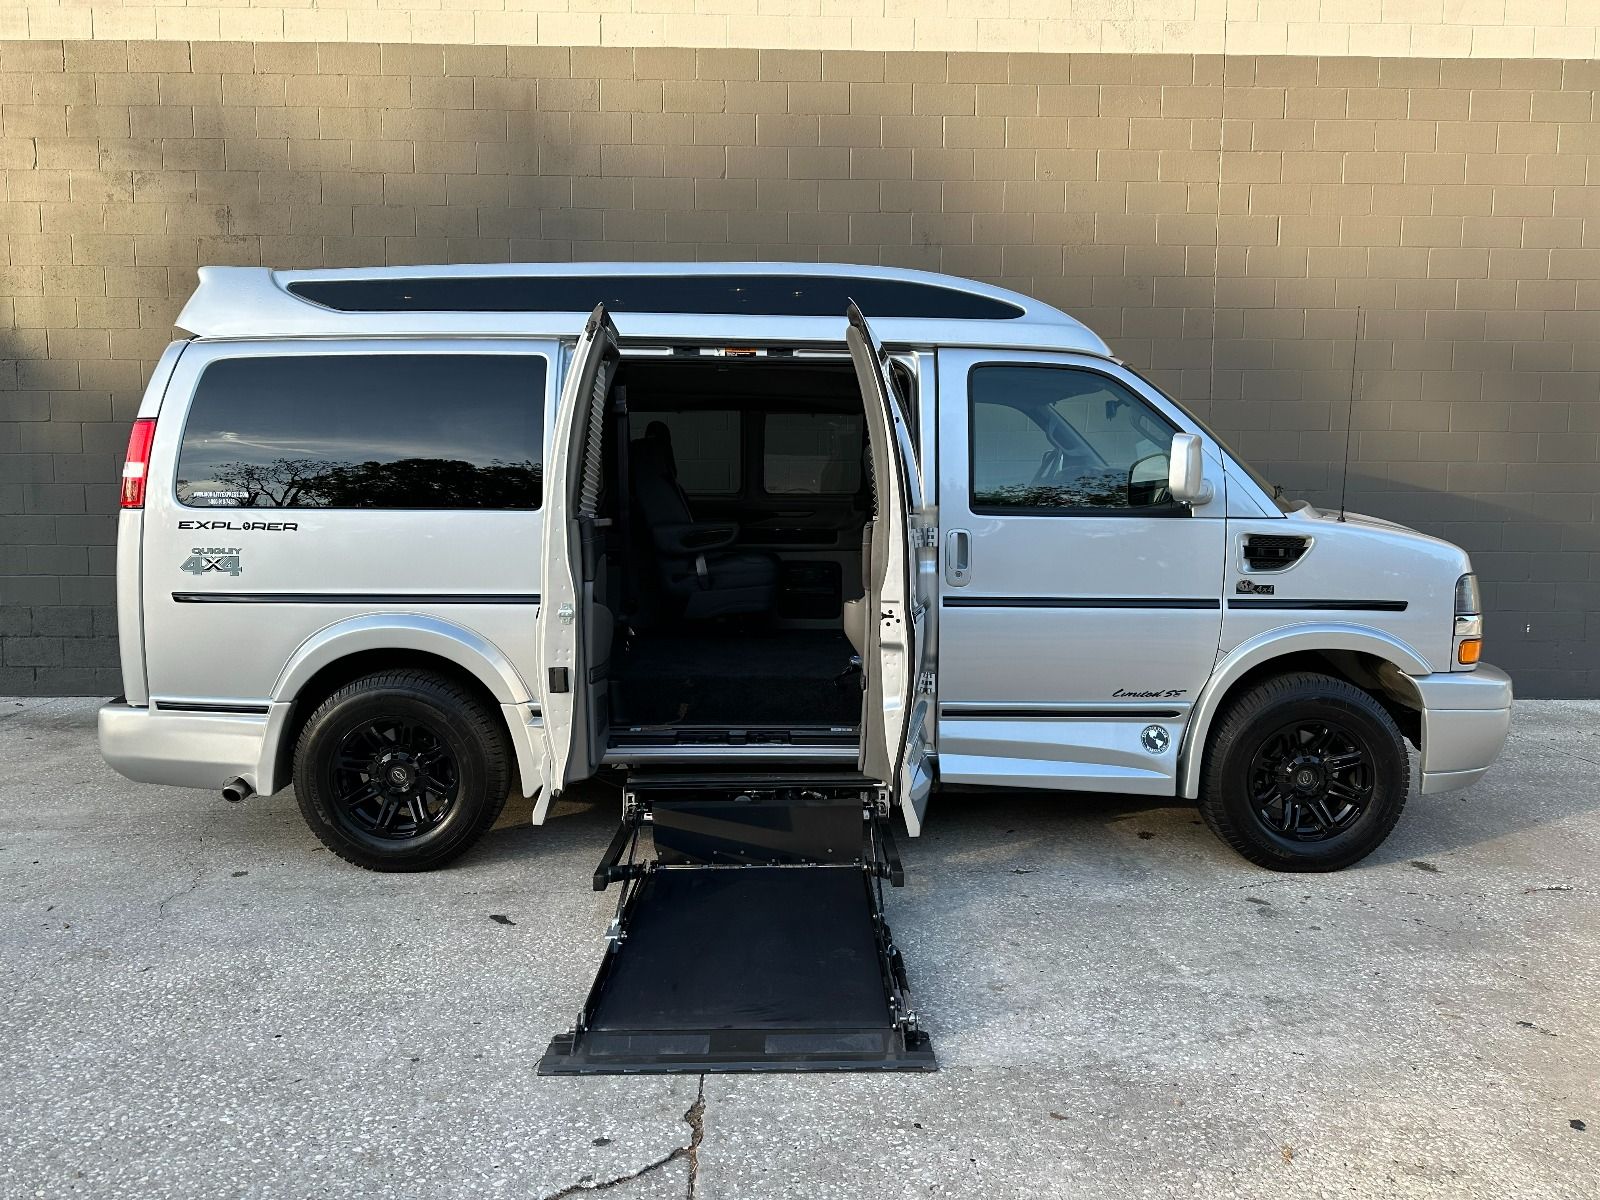 Chevrolet Express Full Size Wheelchair Van with lift system deployed from passenger side barn style doors.